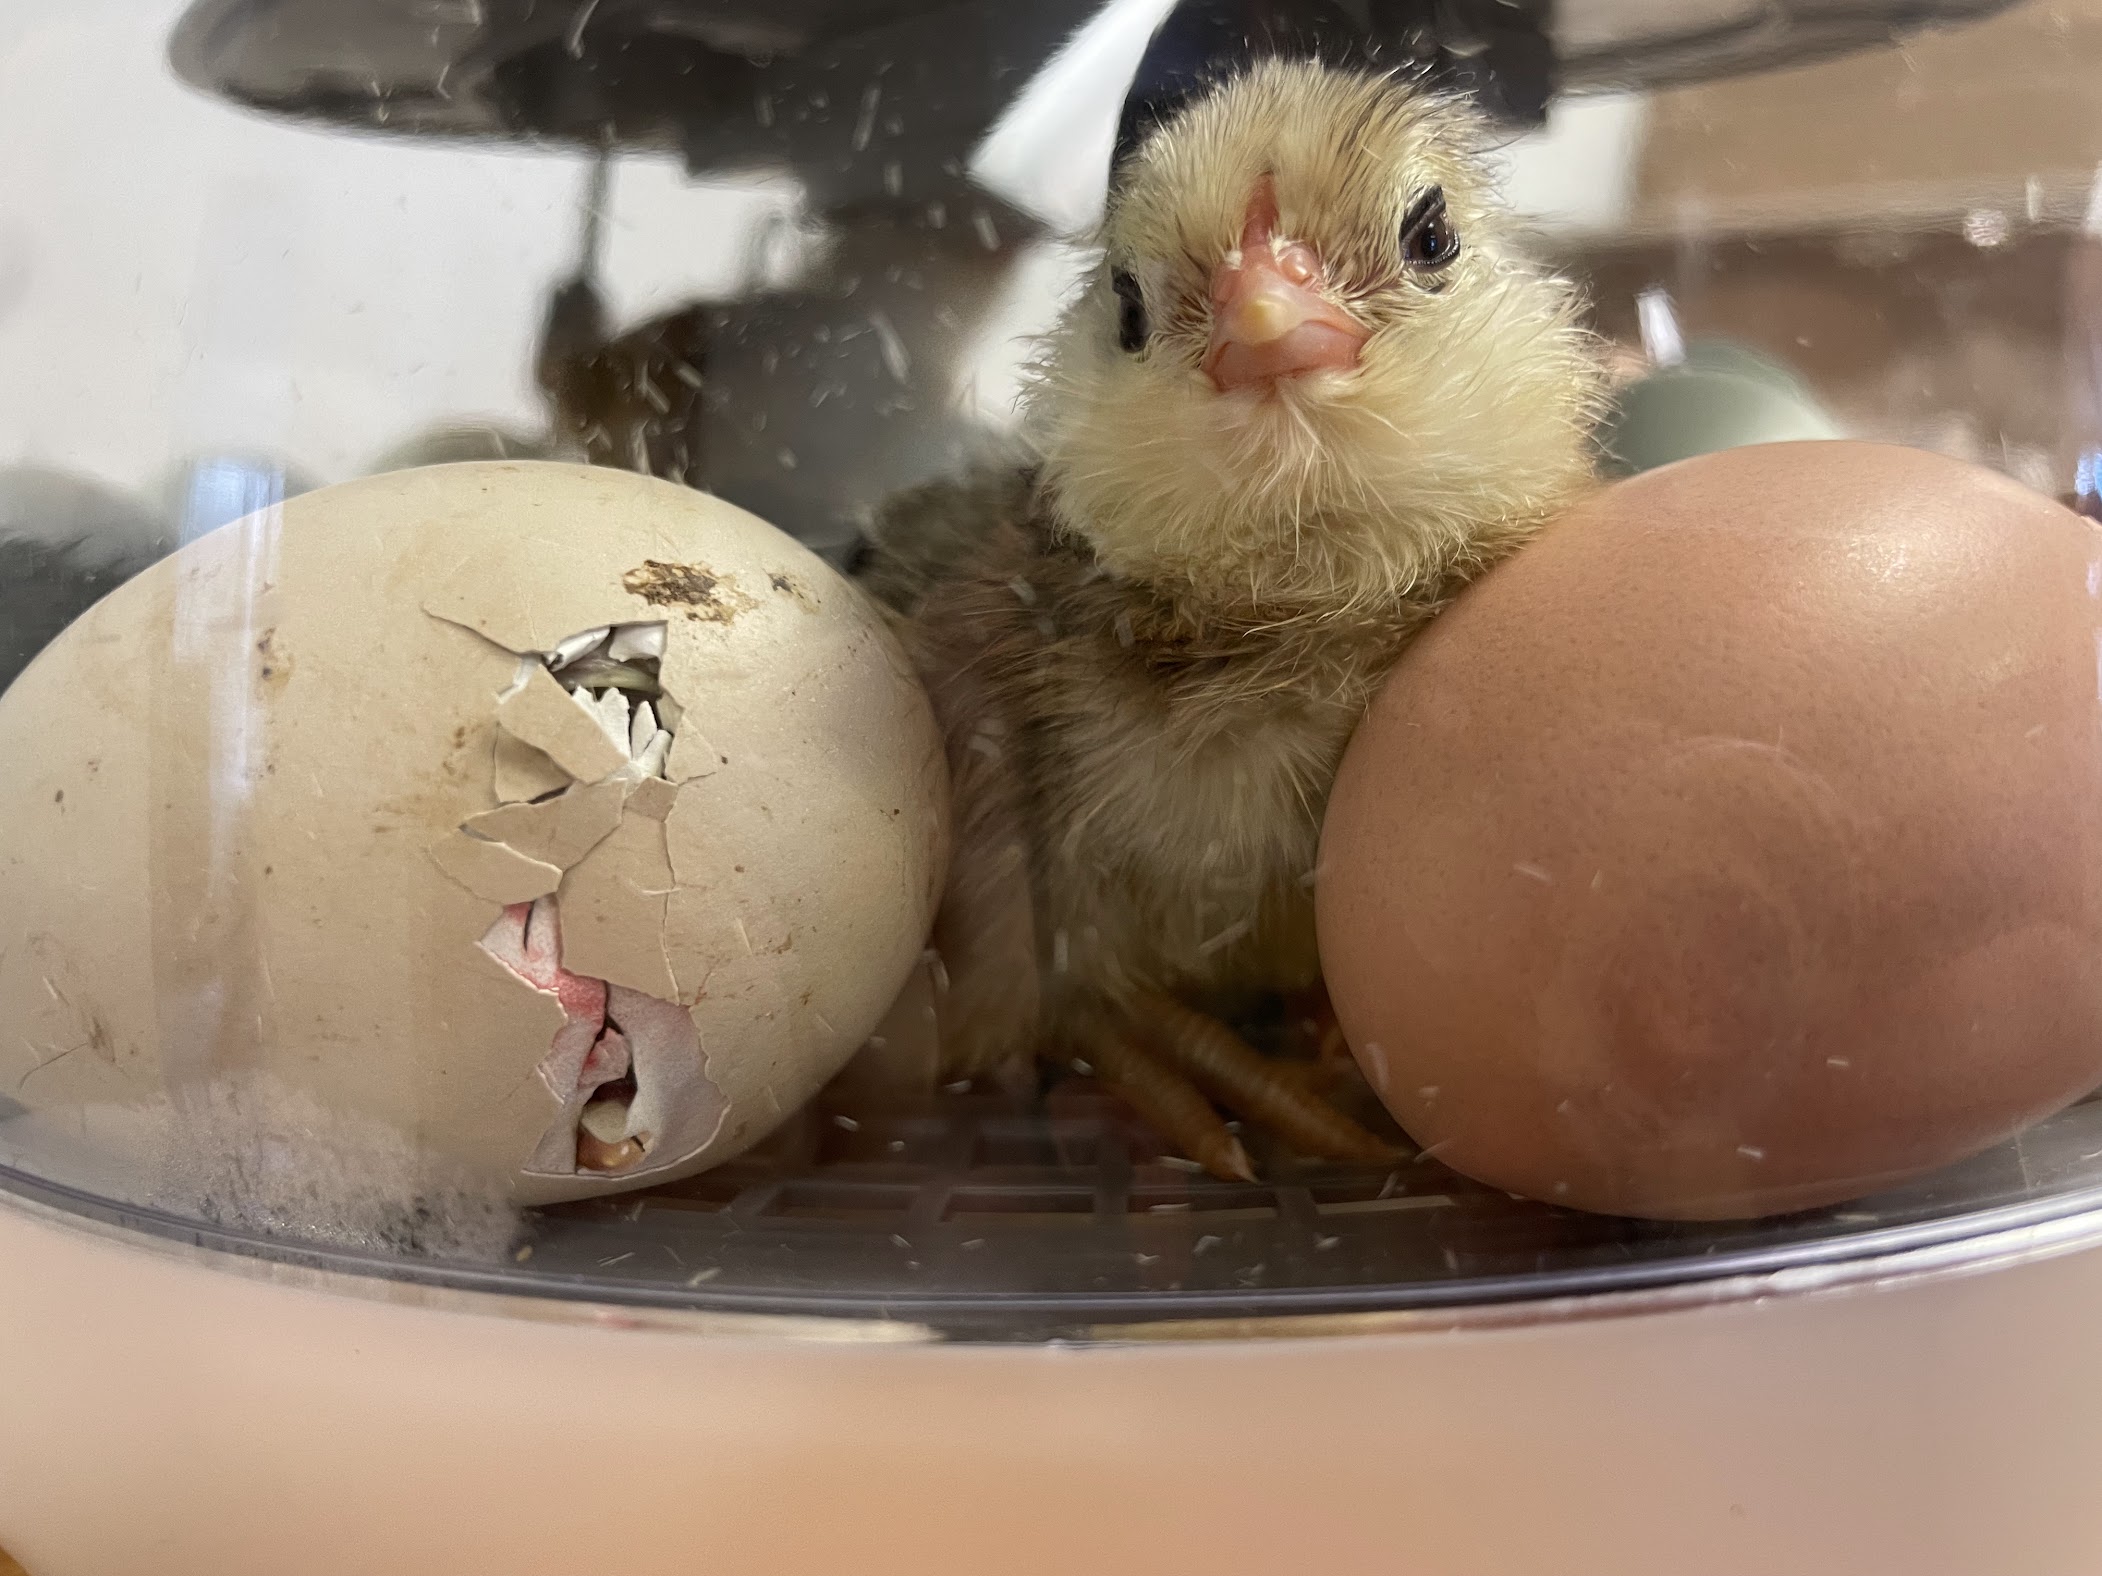 A chick in an incubator with a hatching egg.